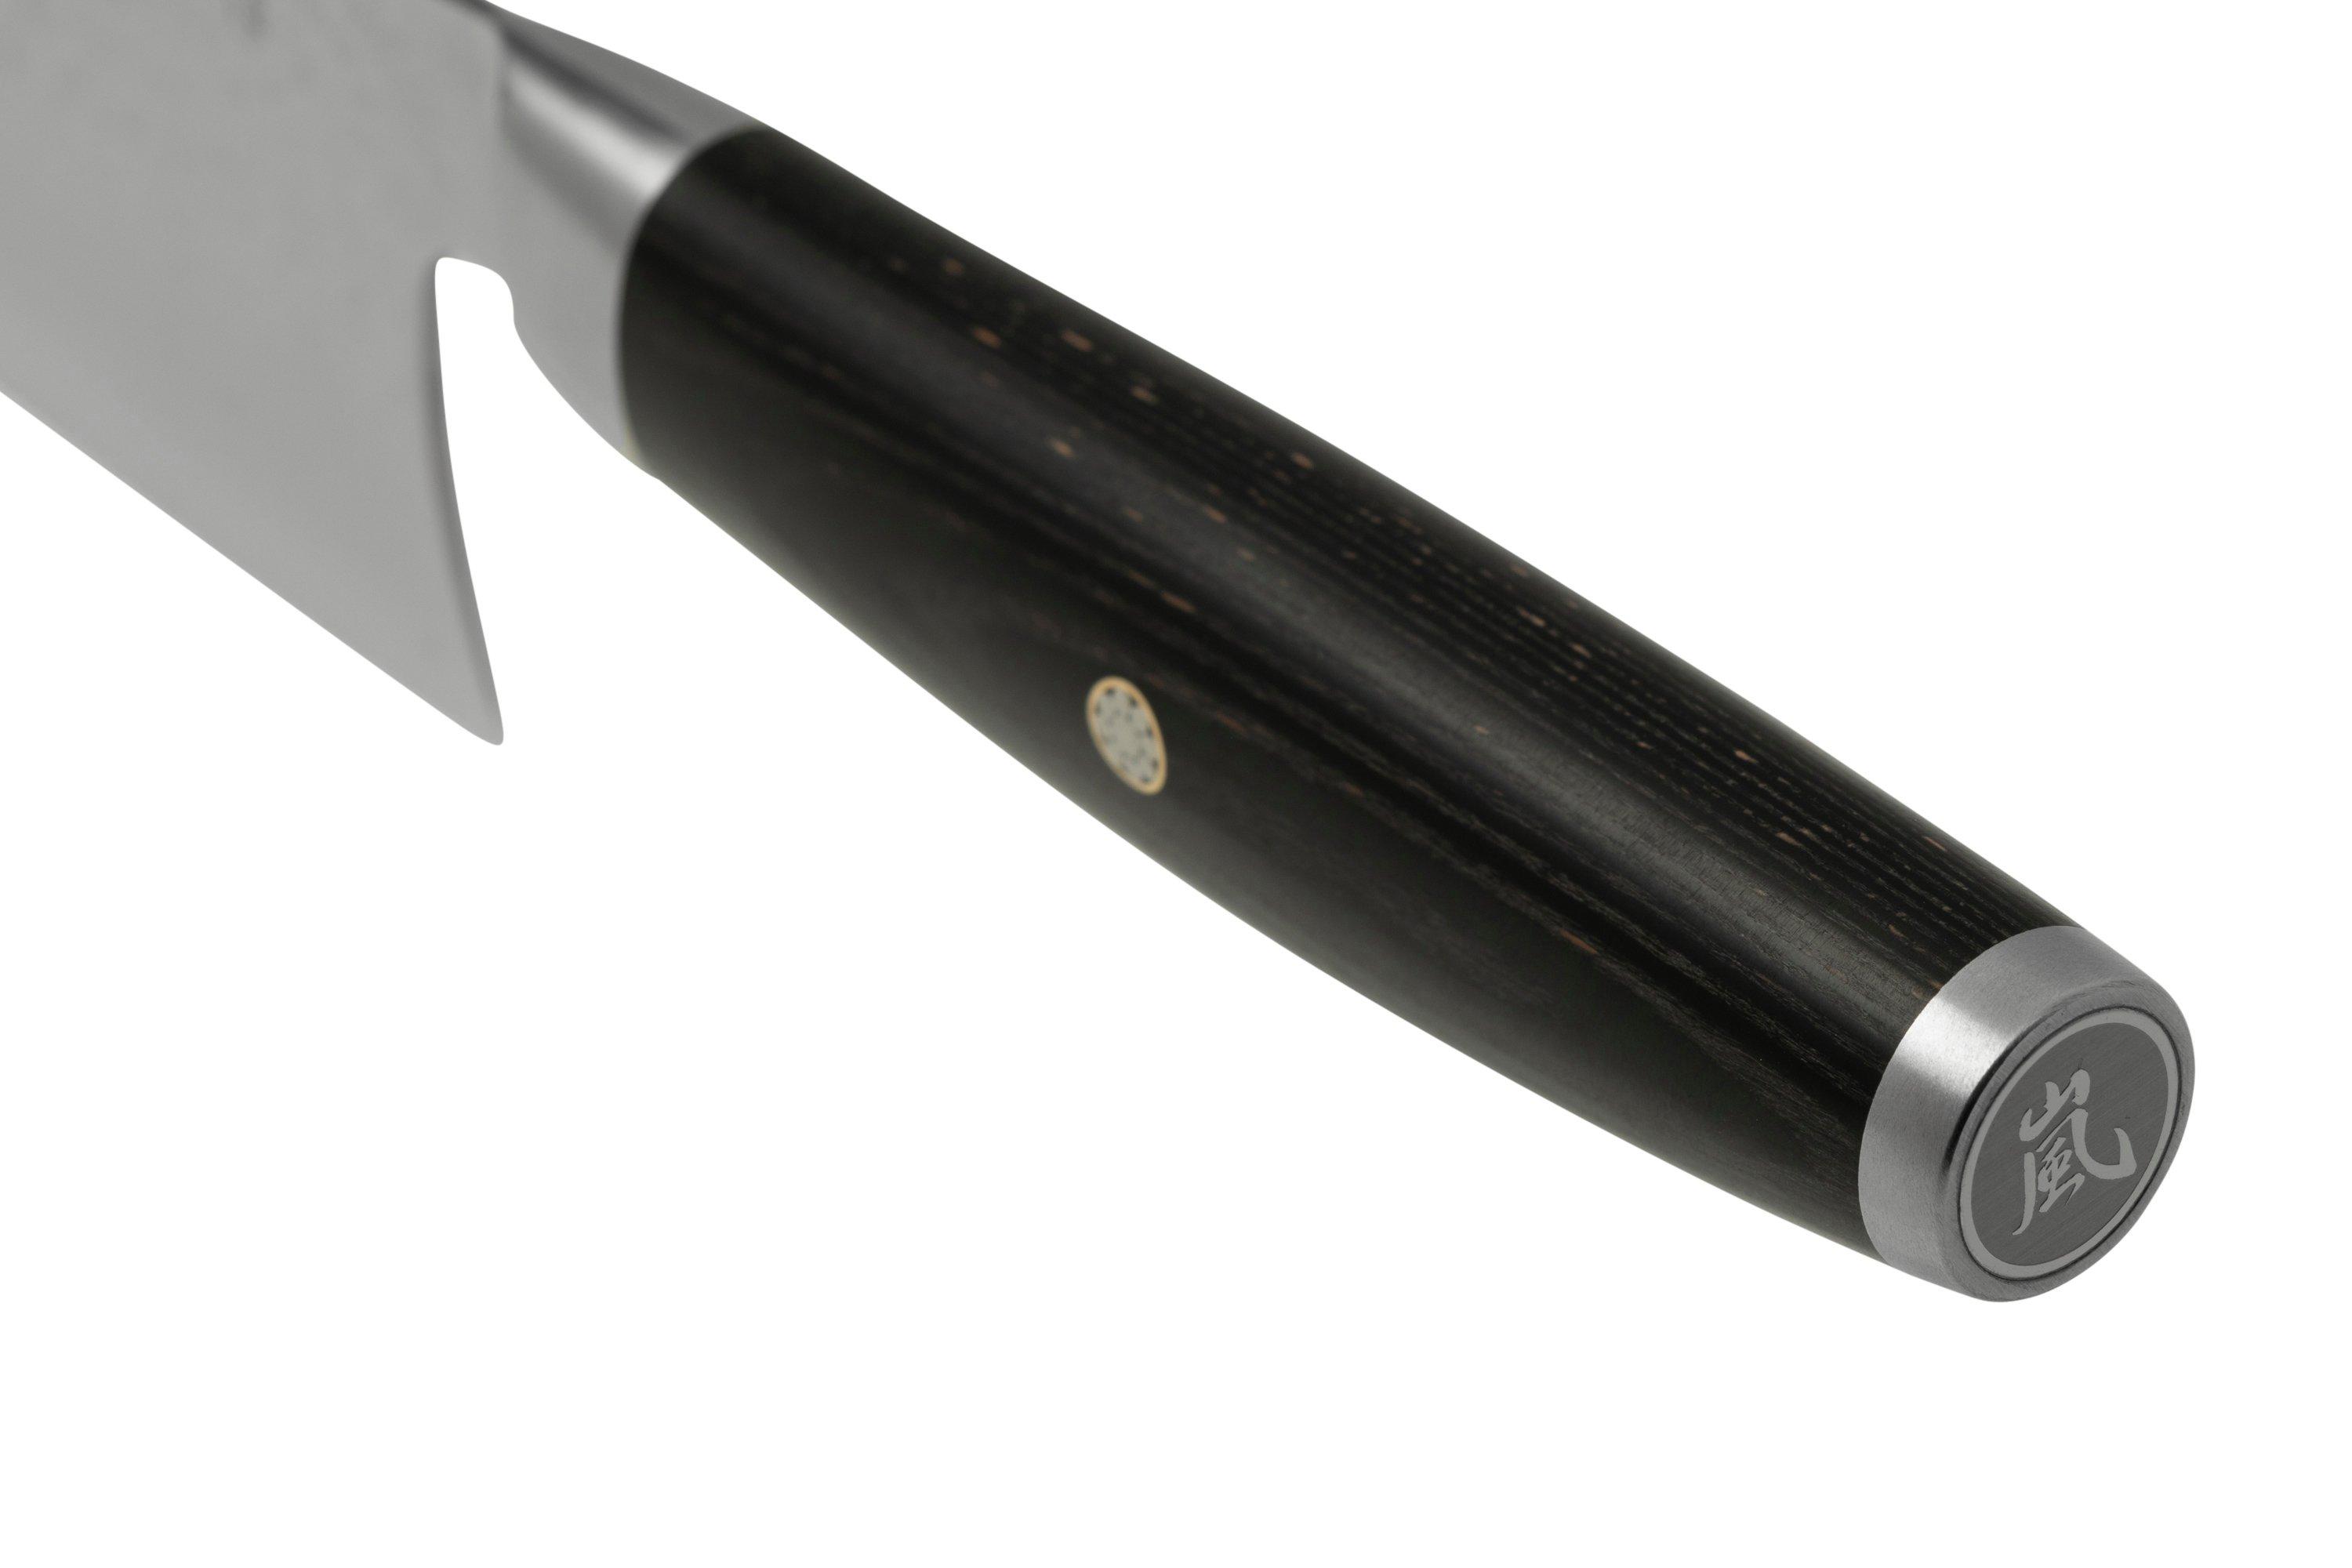 Pro Series 2.0 6inch Chef Knife with Kullens